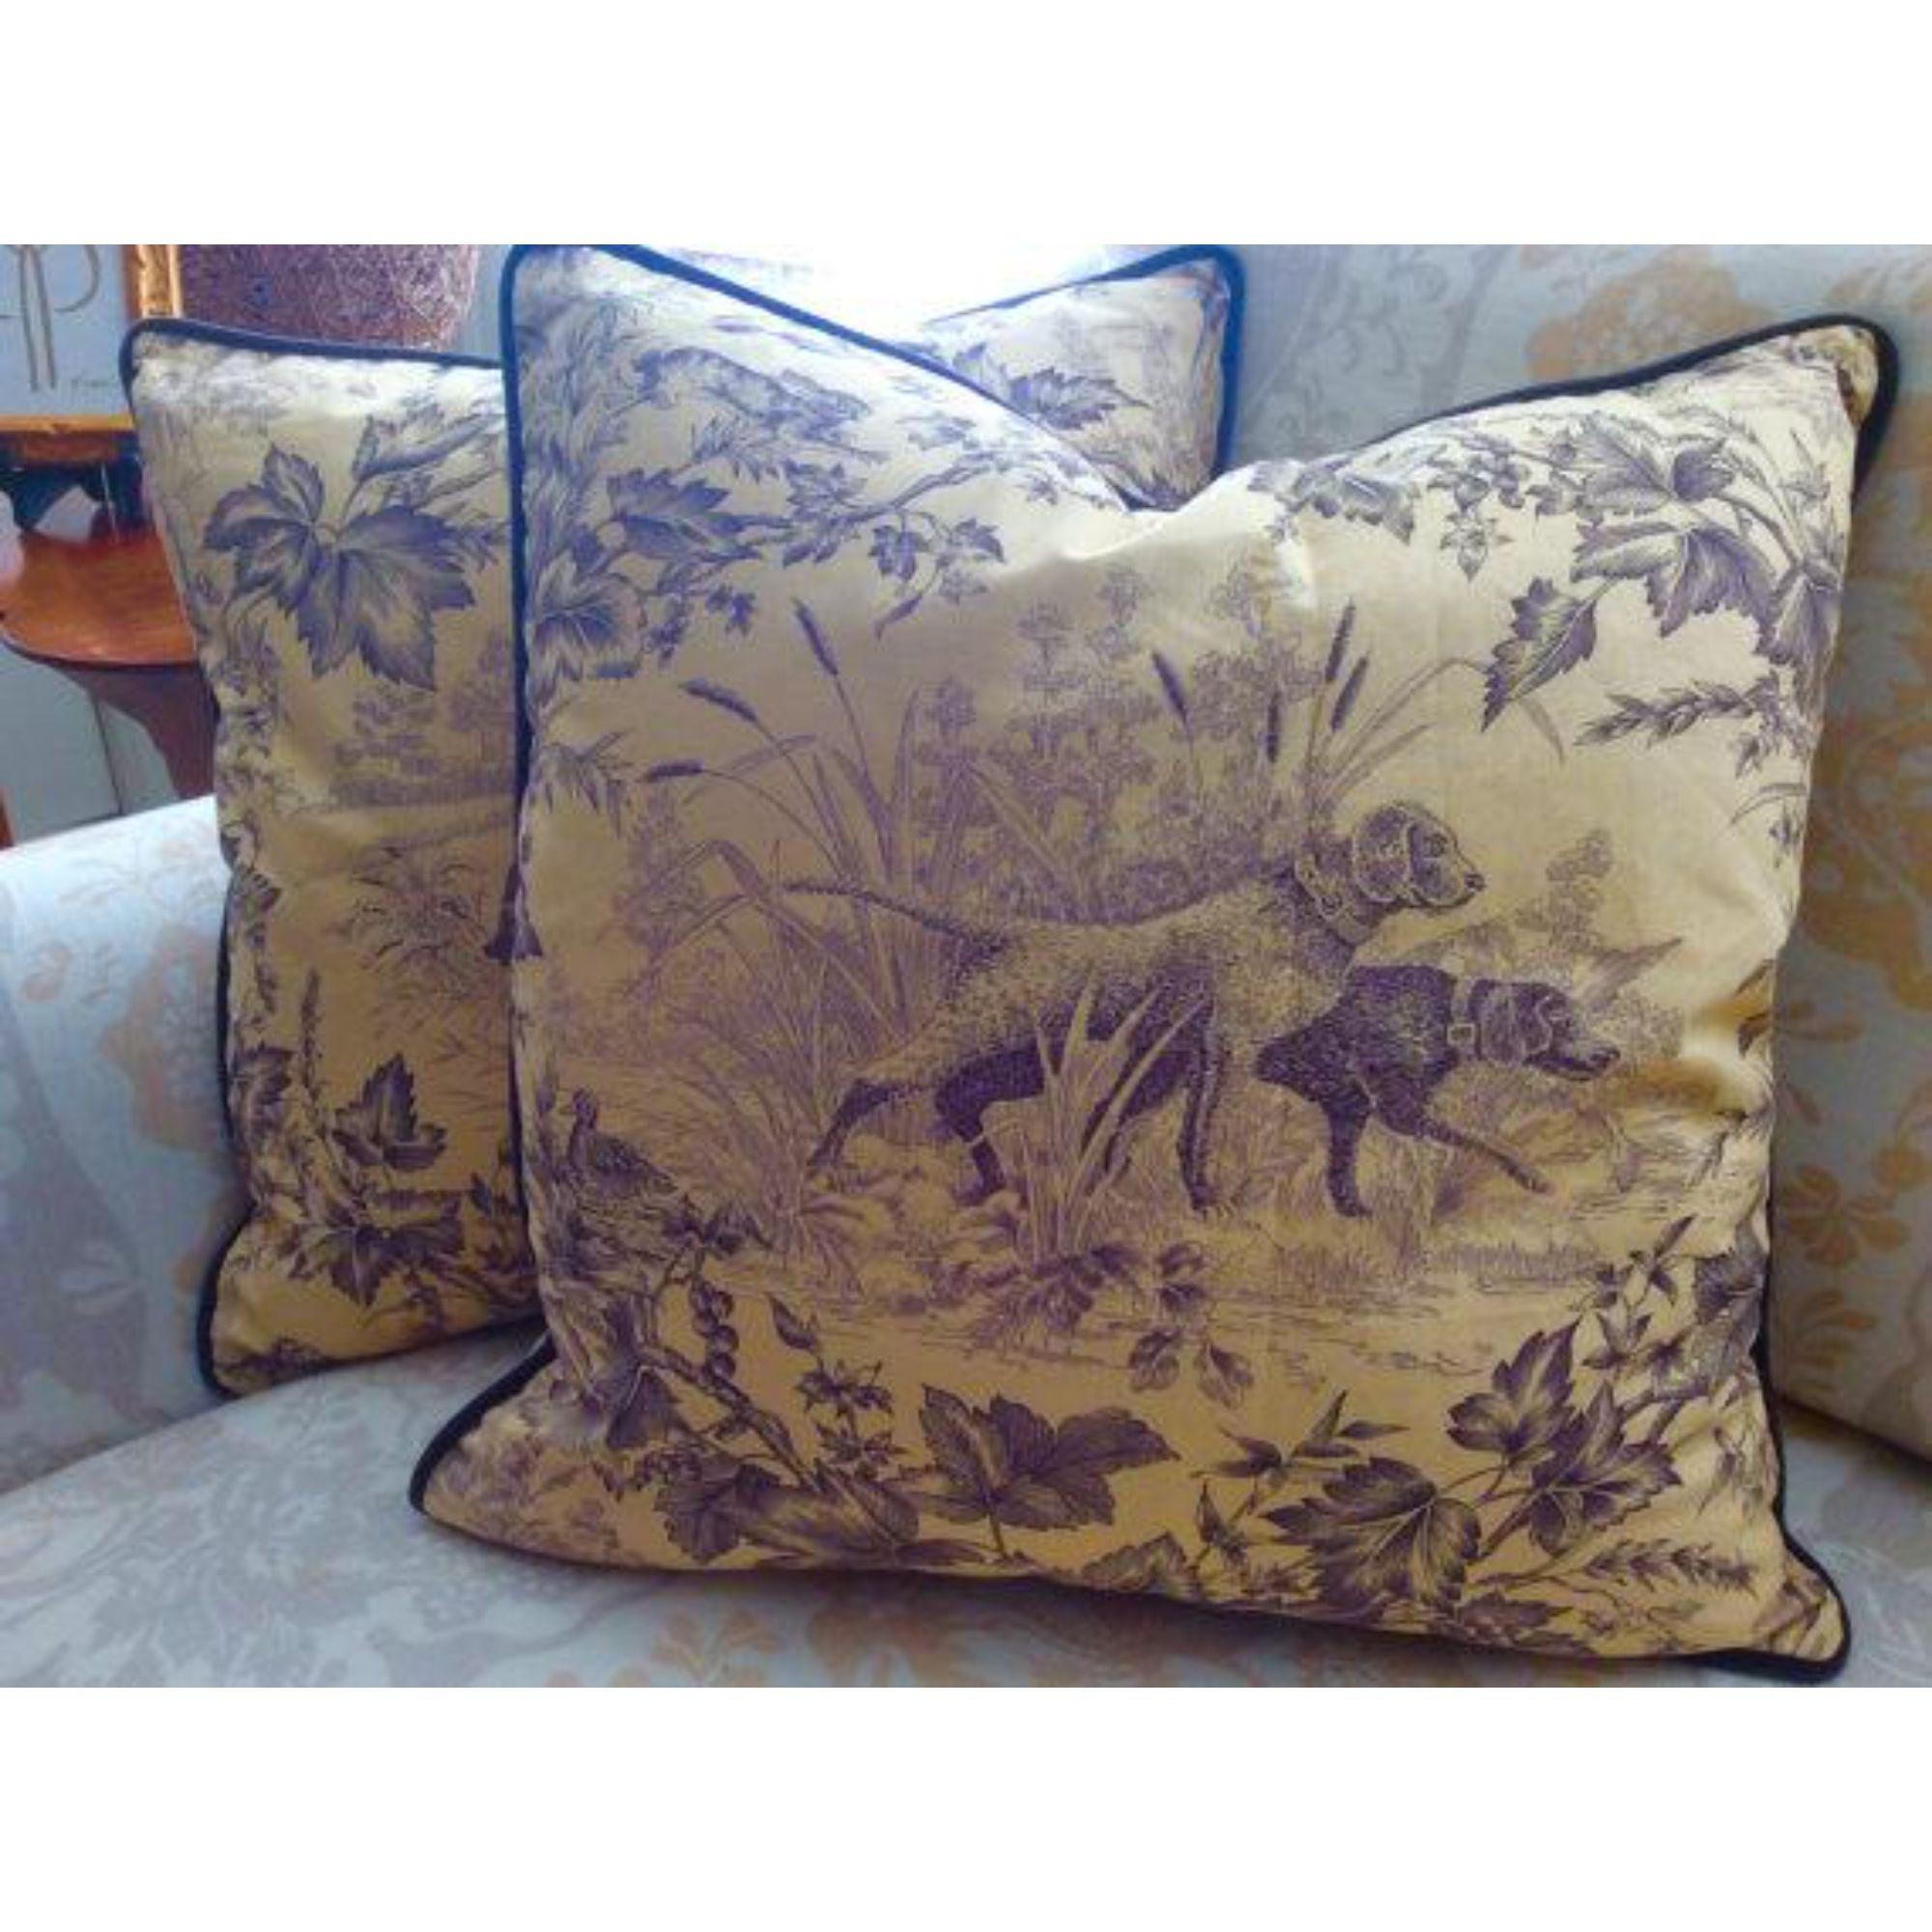 Brunschwig & Fils Hunting Toile in Tobacco & Cream Pillows - a Pair In New Condition For Sale In Winder, GA